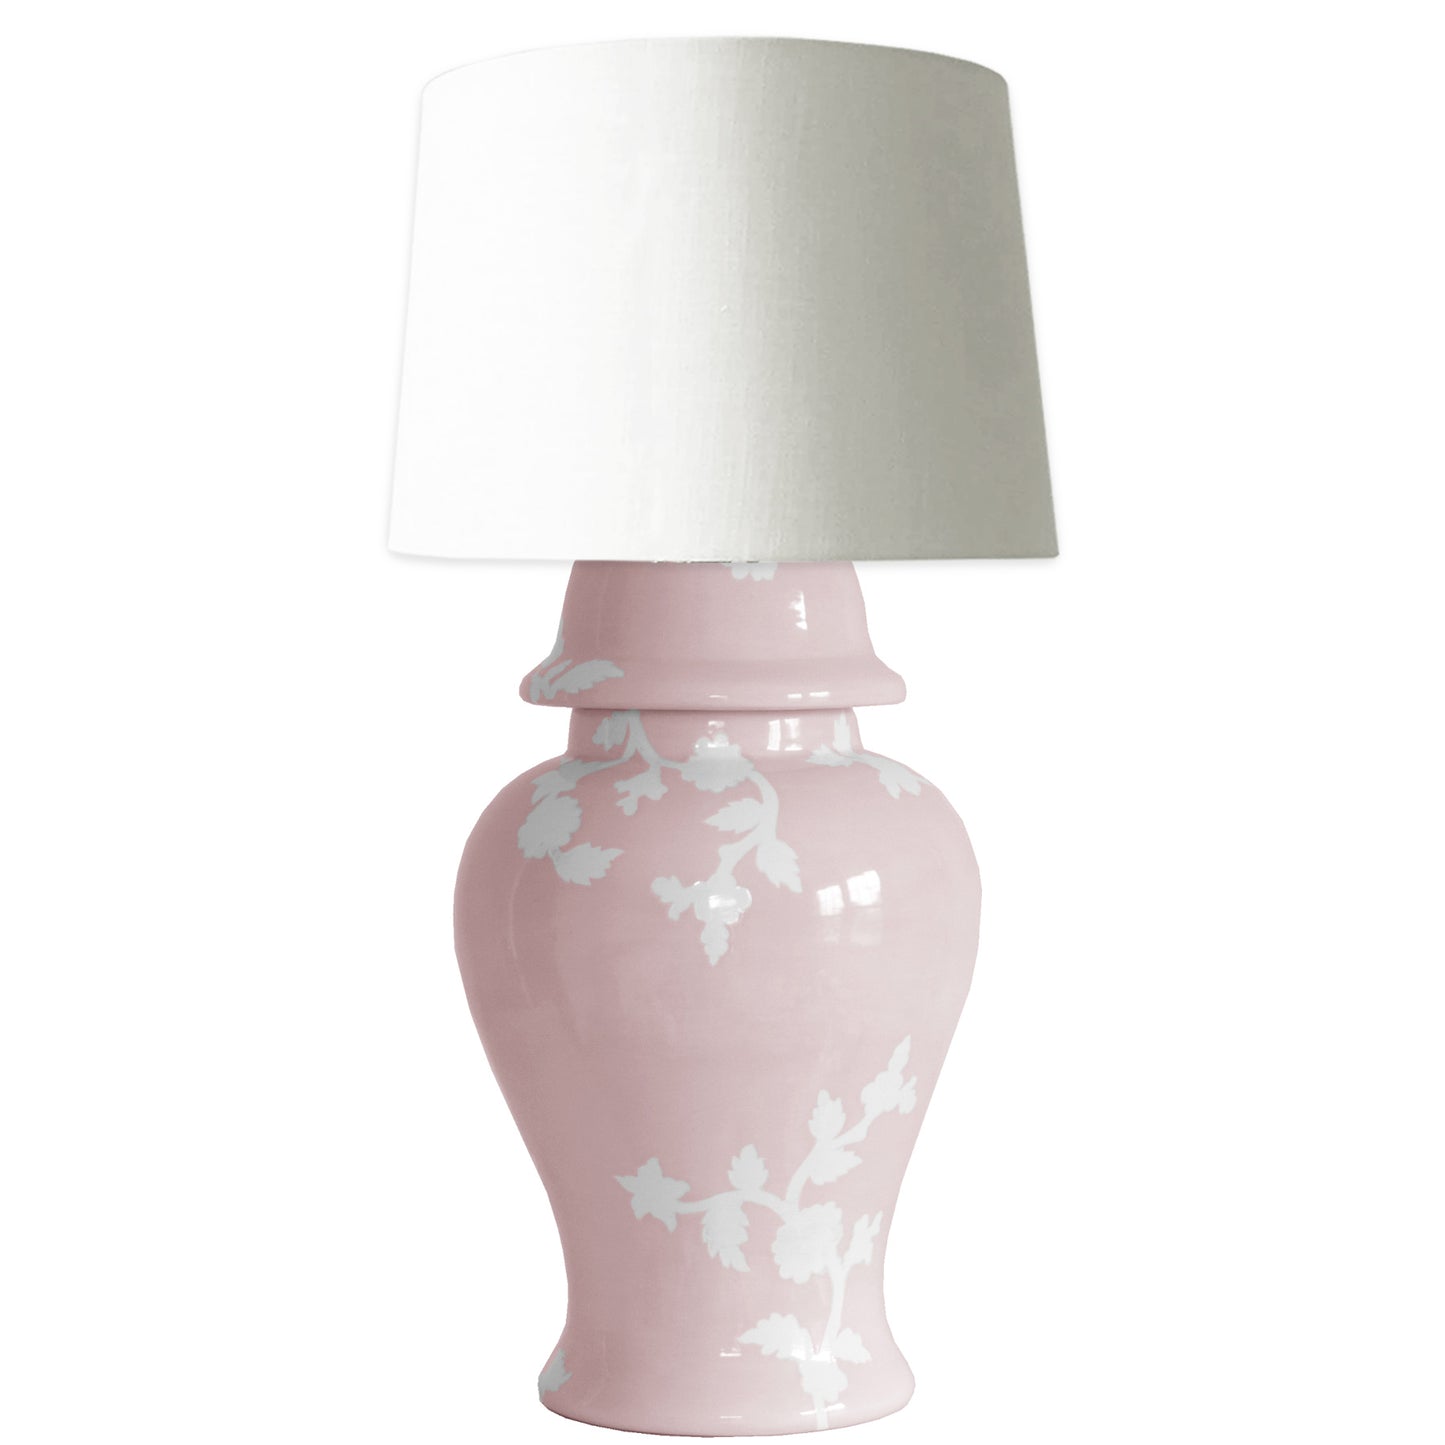 Chinoiserie Dreams Ginger Jar Lamp in Cherry Blossom